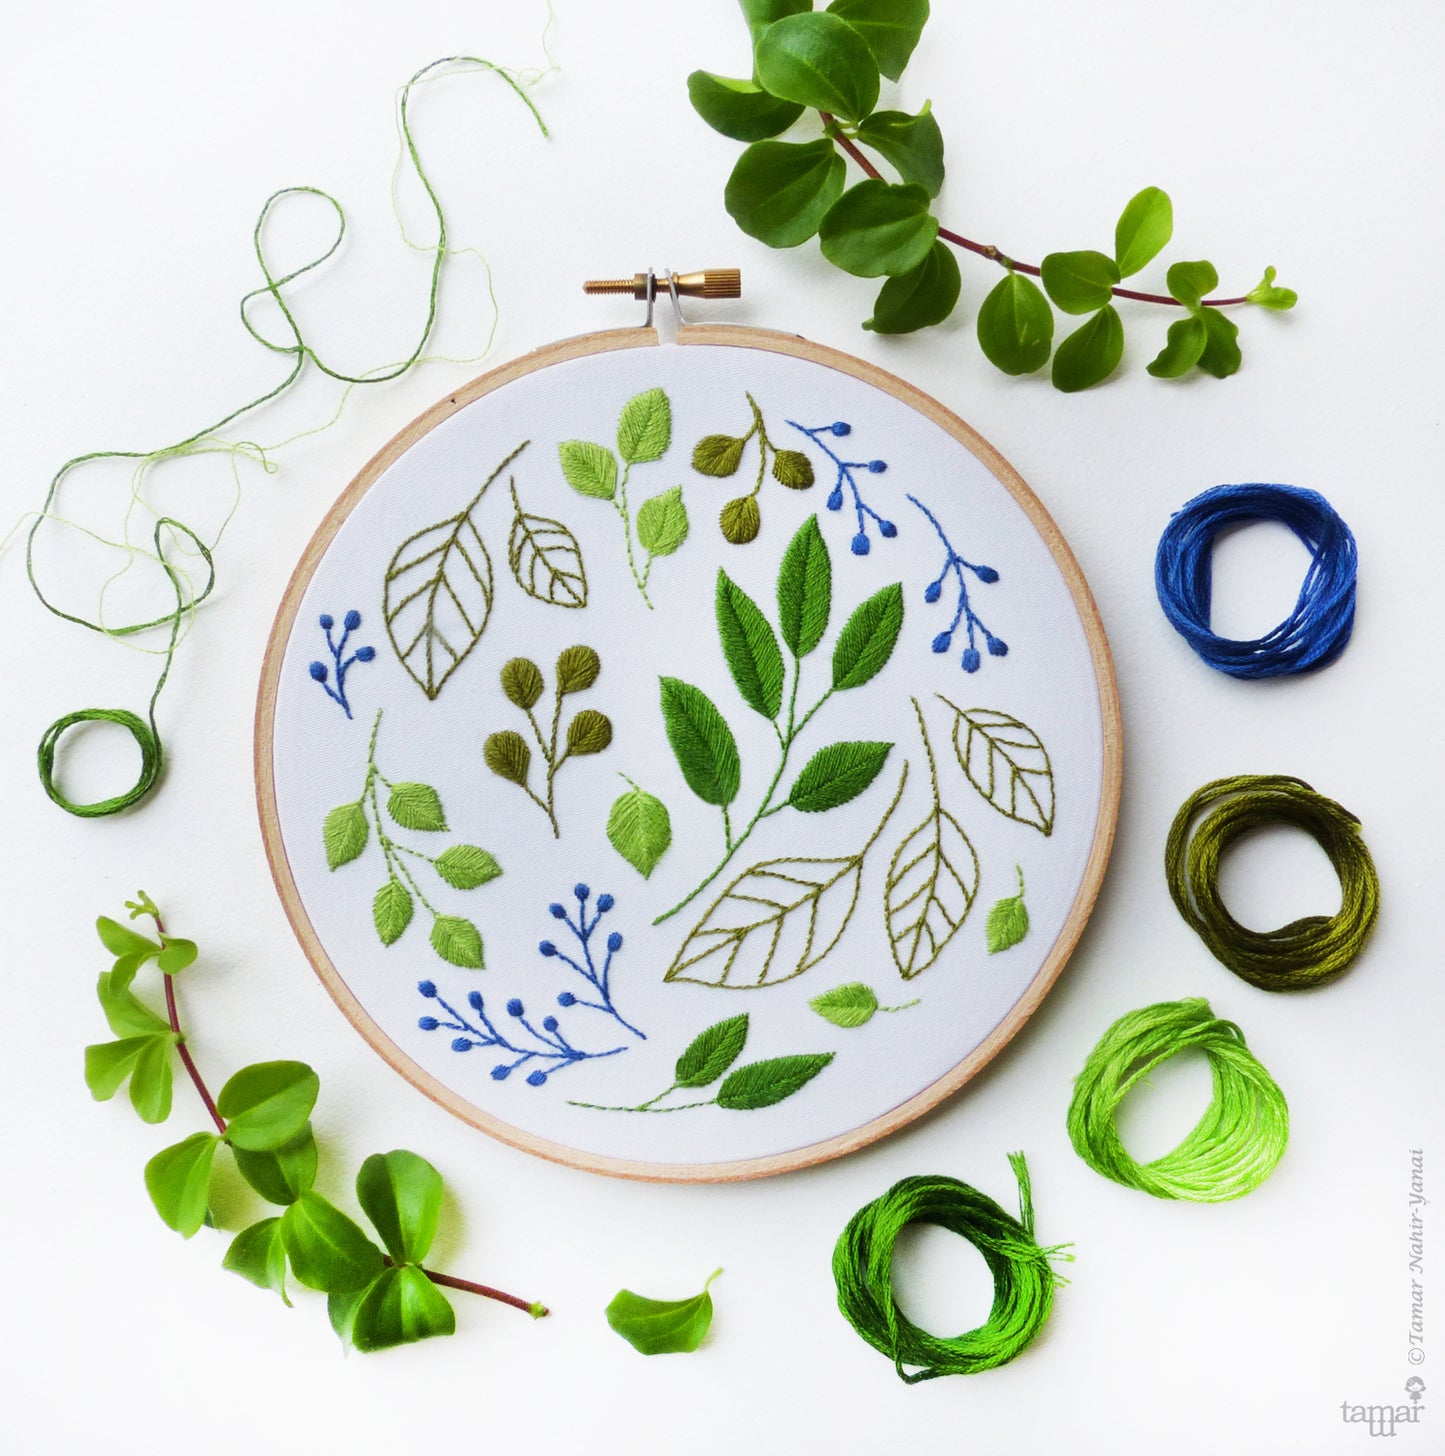 Windy Leaves 6" Embroidery Kit